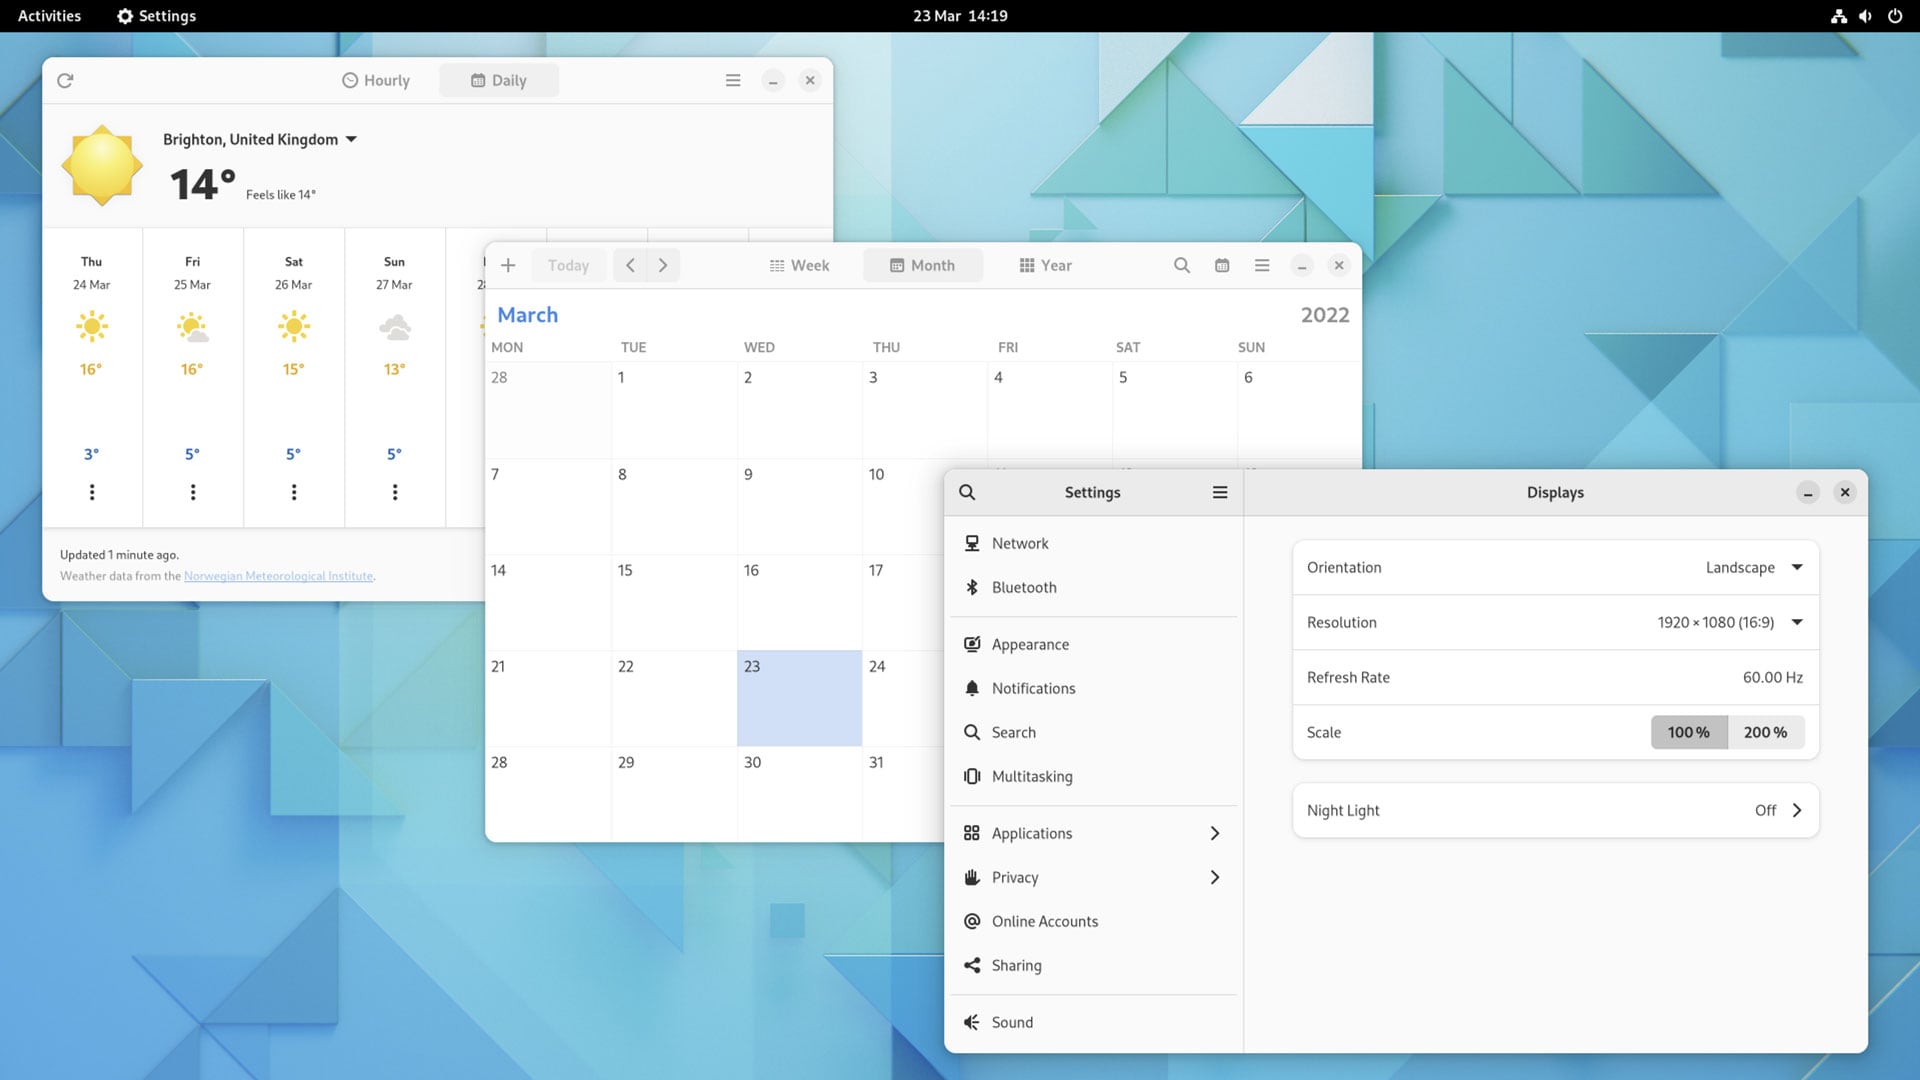 This is the GNOME desktop